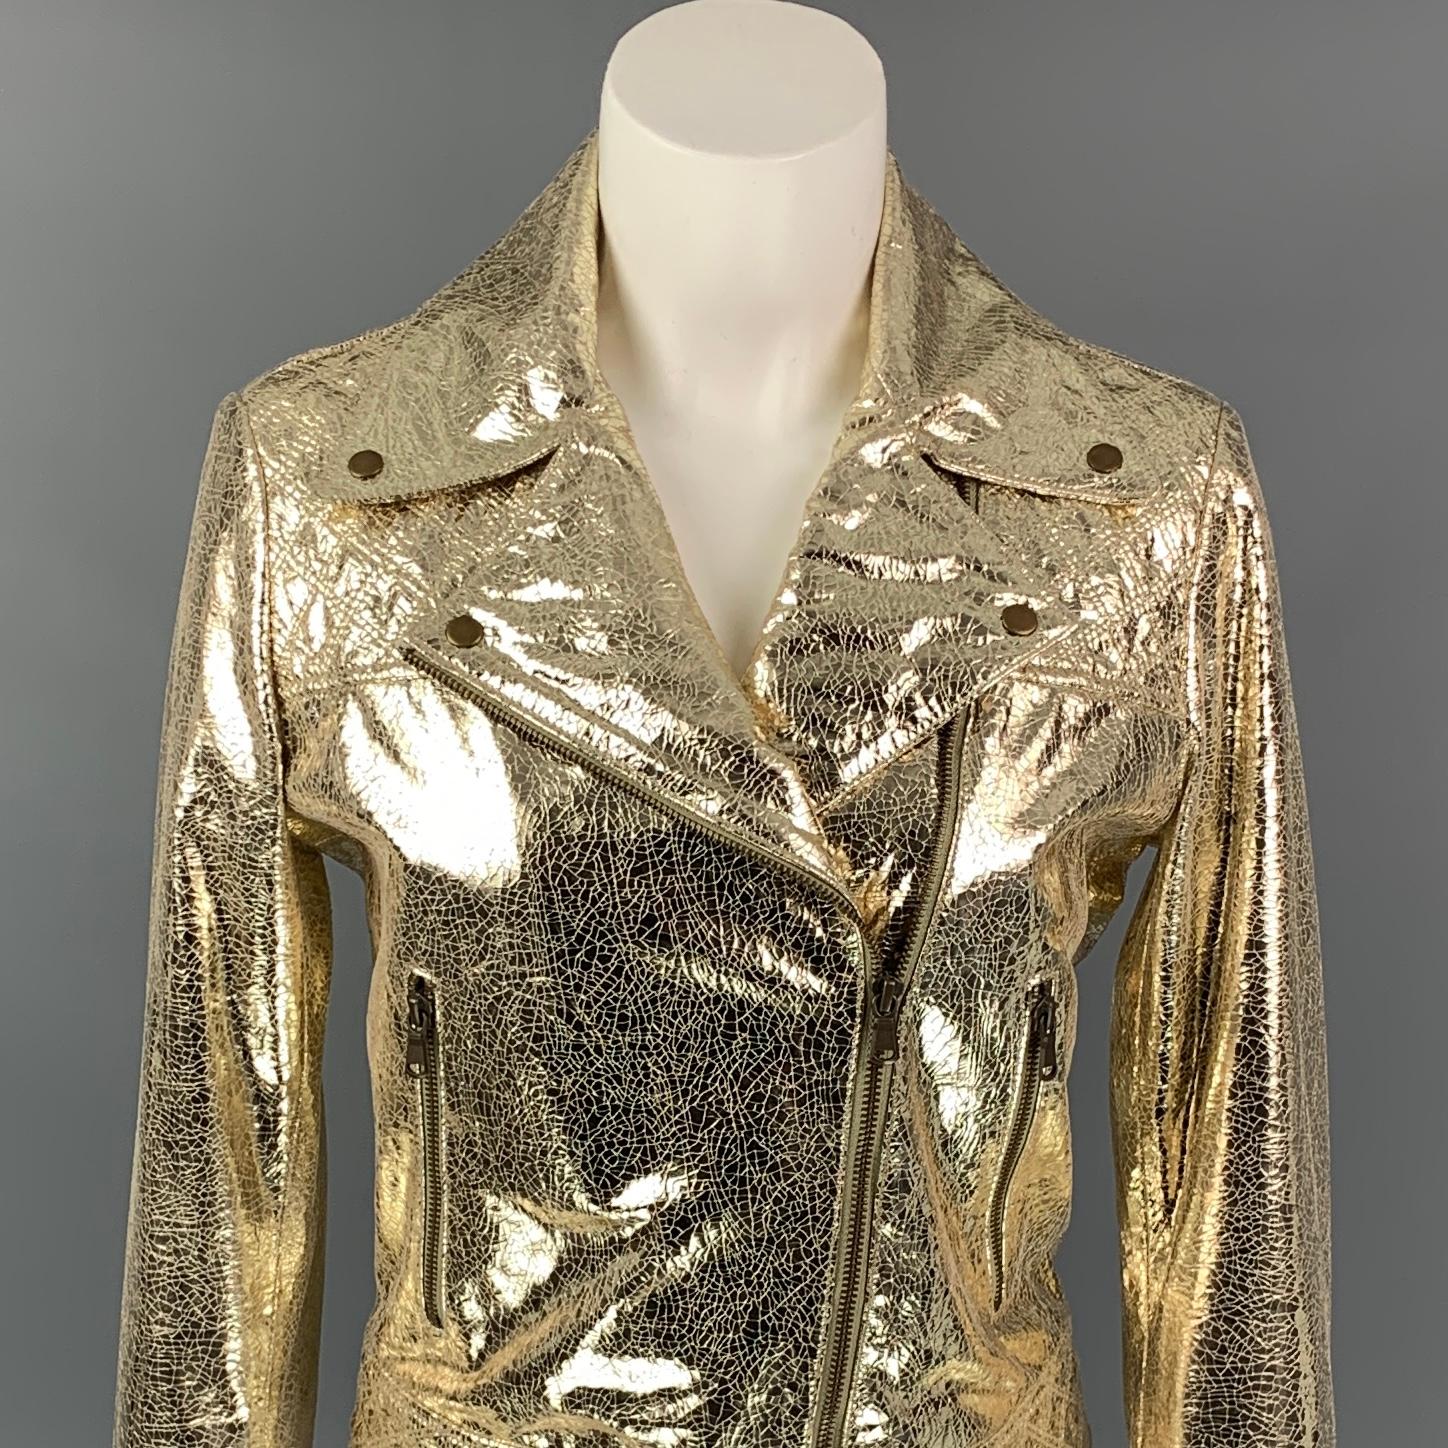 METEO jacket comes in a gold metallic leather with a full liner featuring a biker style, zipper sleeves, snap button details, zipper pockets, and a zip up closure. 

Very Good Pre-Owned Condition.
Marked: 38

Measurements:

Shoulder: 15.5 in.
Bust: